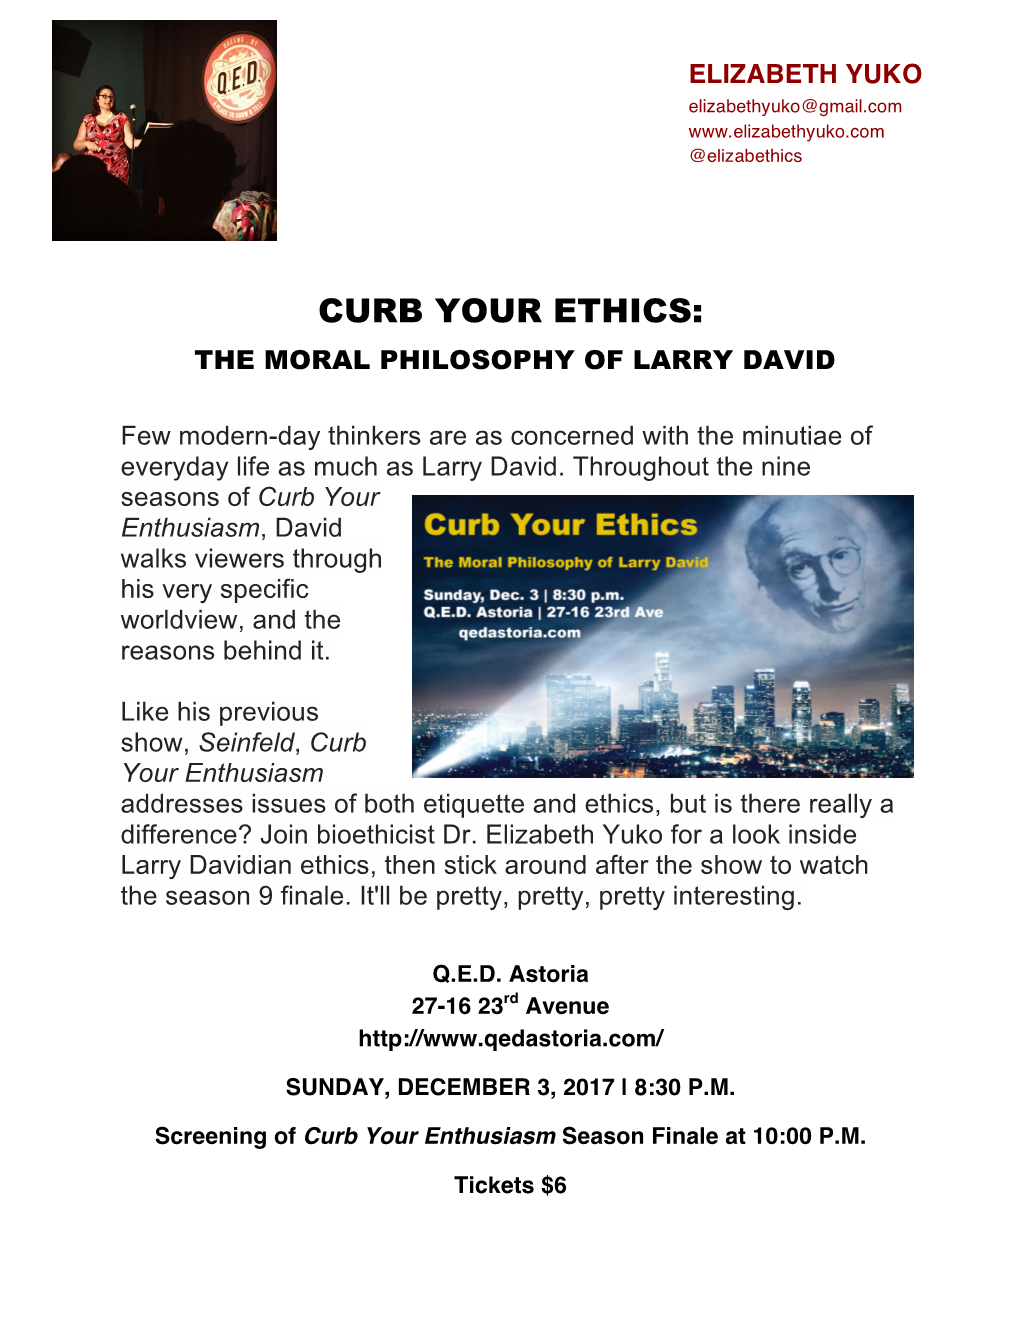 Curb Your Ethics: the Moral Philosophy of Larry David